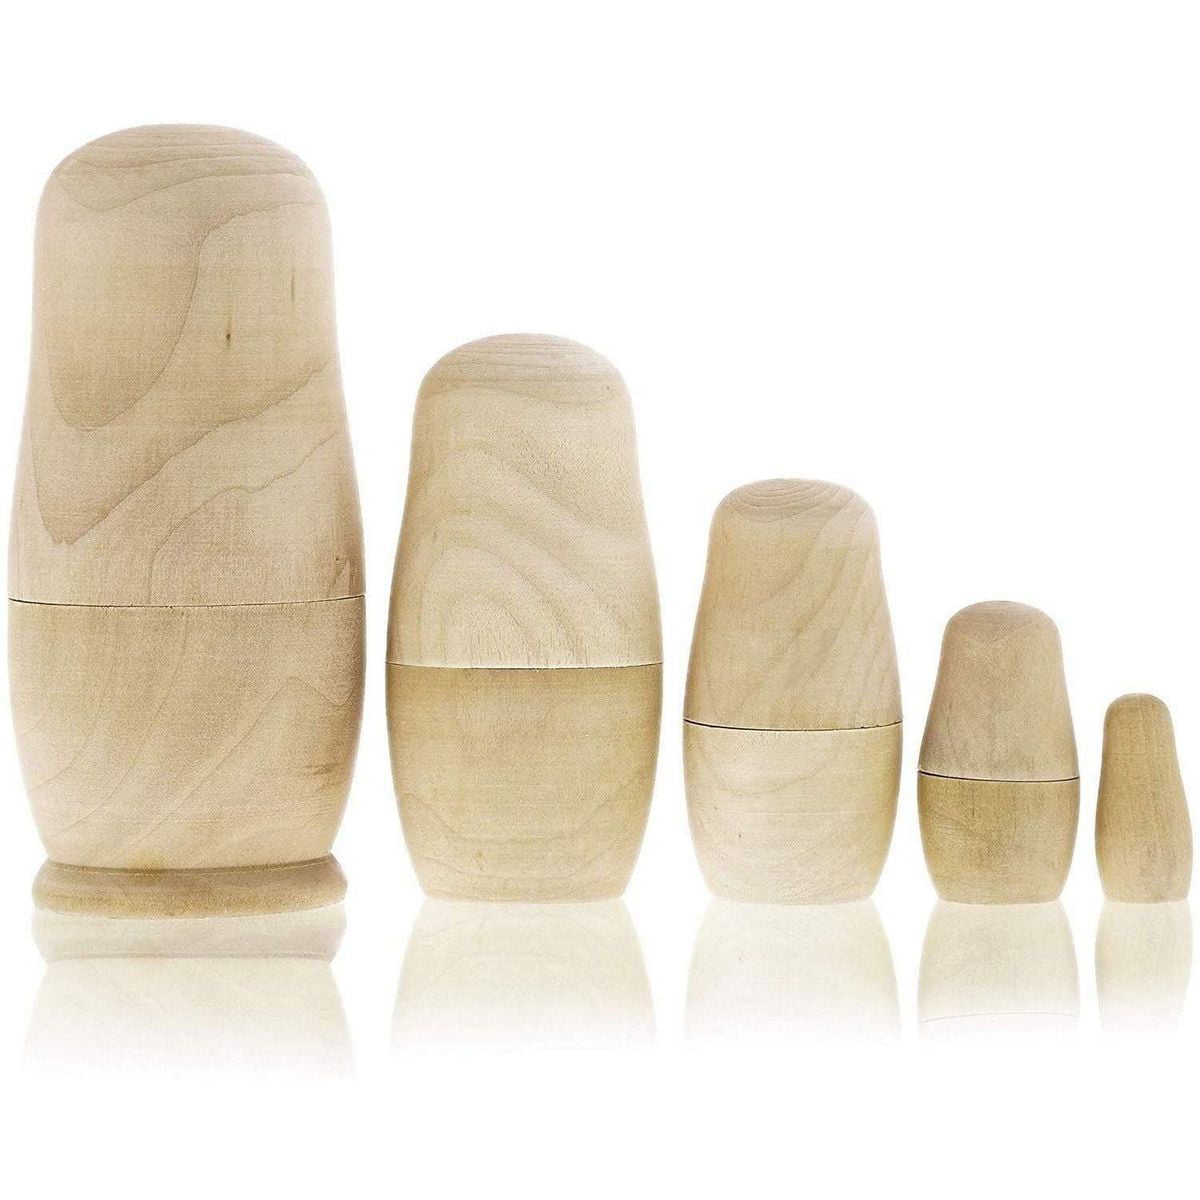 Live It Up Wooden 5 Piece Set Party Supplies Puppy Dog Nesting Dolls 